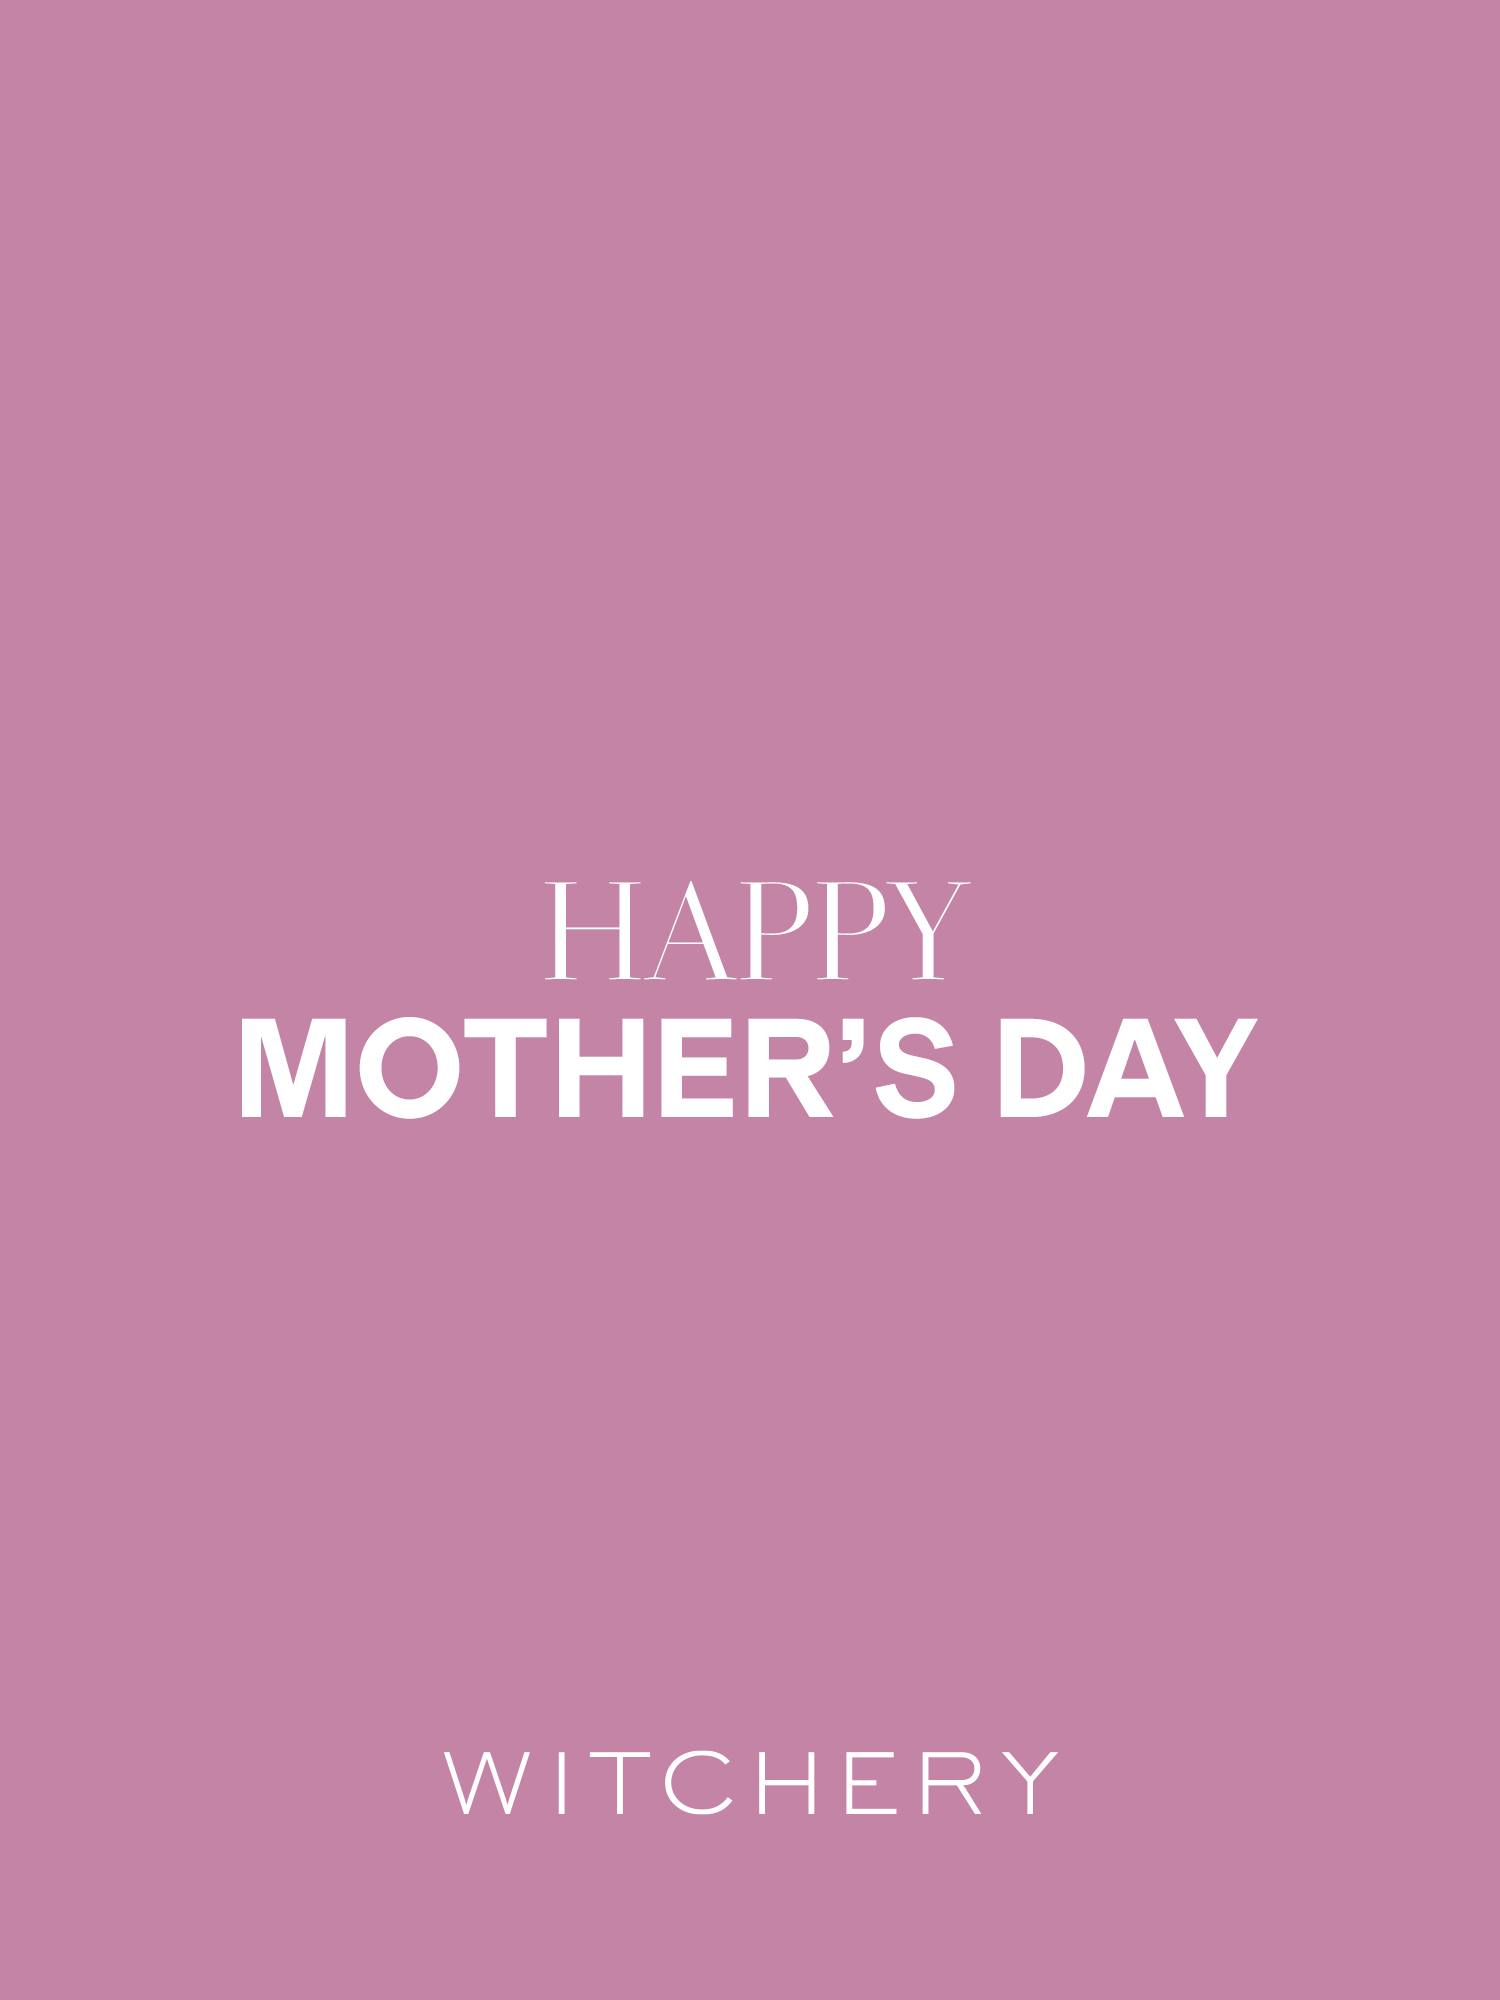 WI_Witchery eGift Card - Mother's Day 5